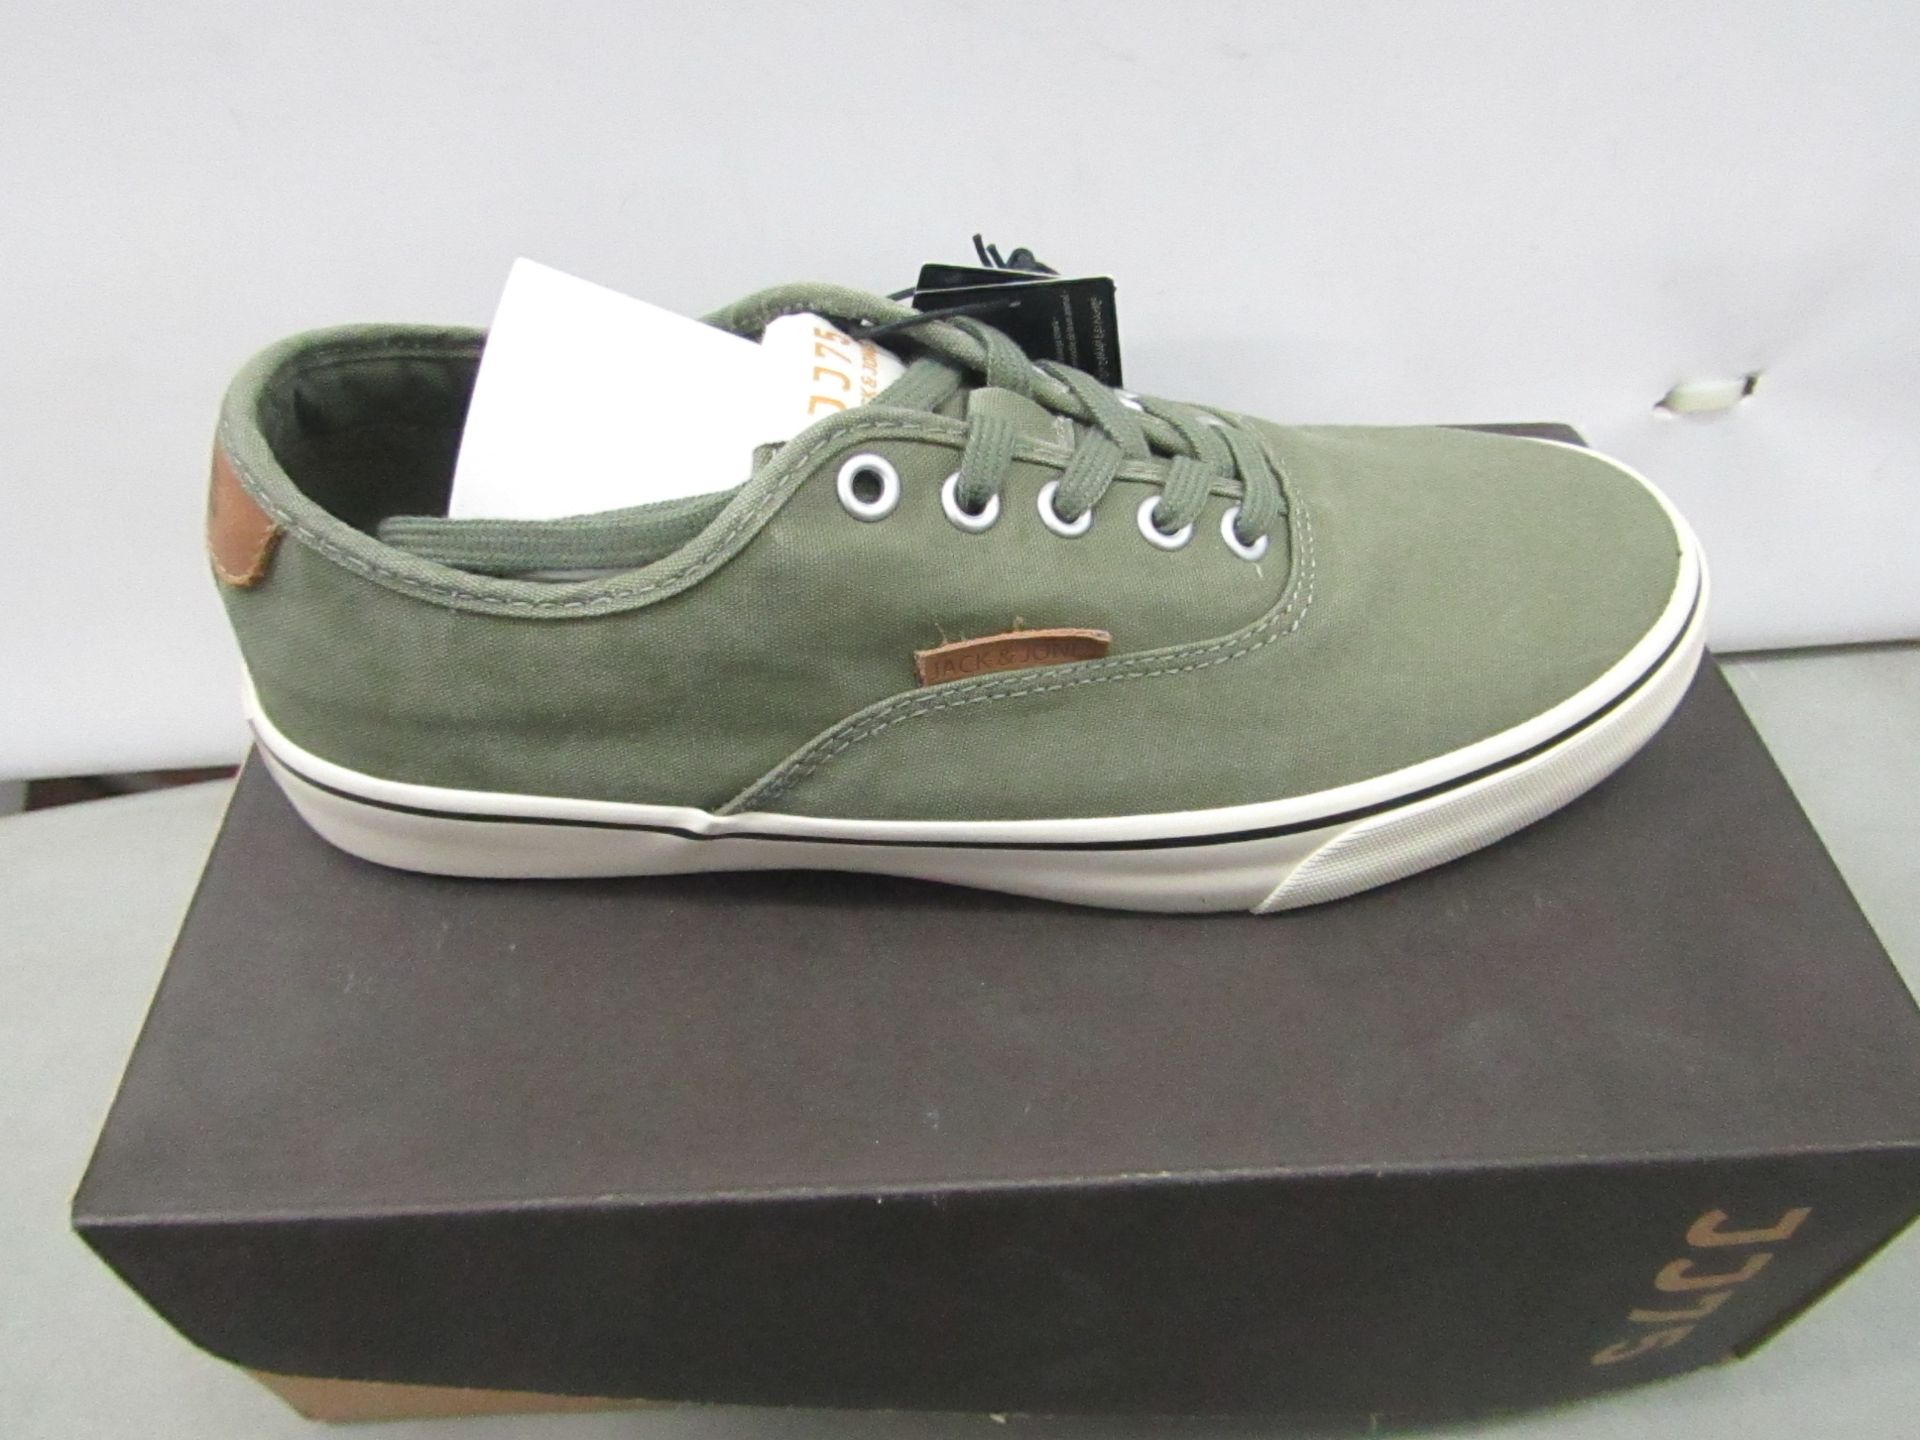 Jack & Jones Canvas shoes green size 7 new & boxed